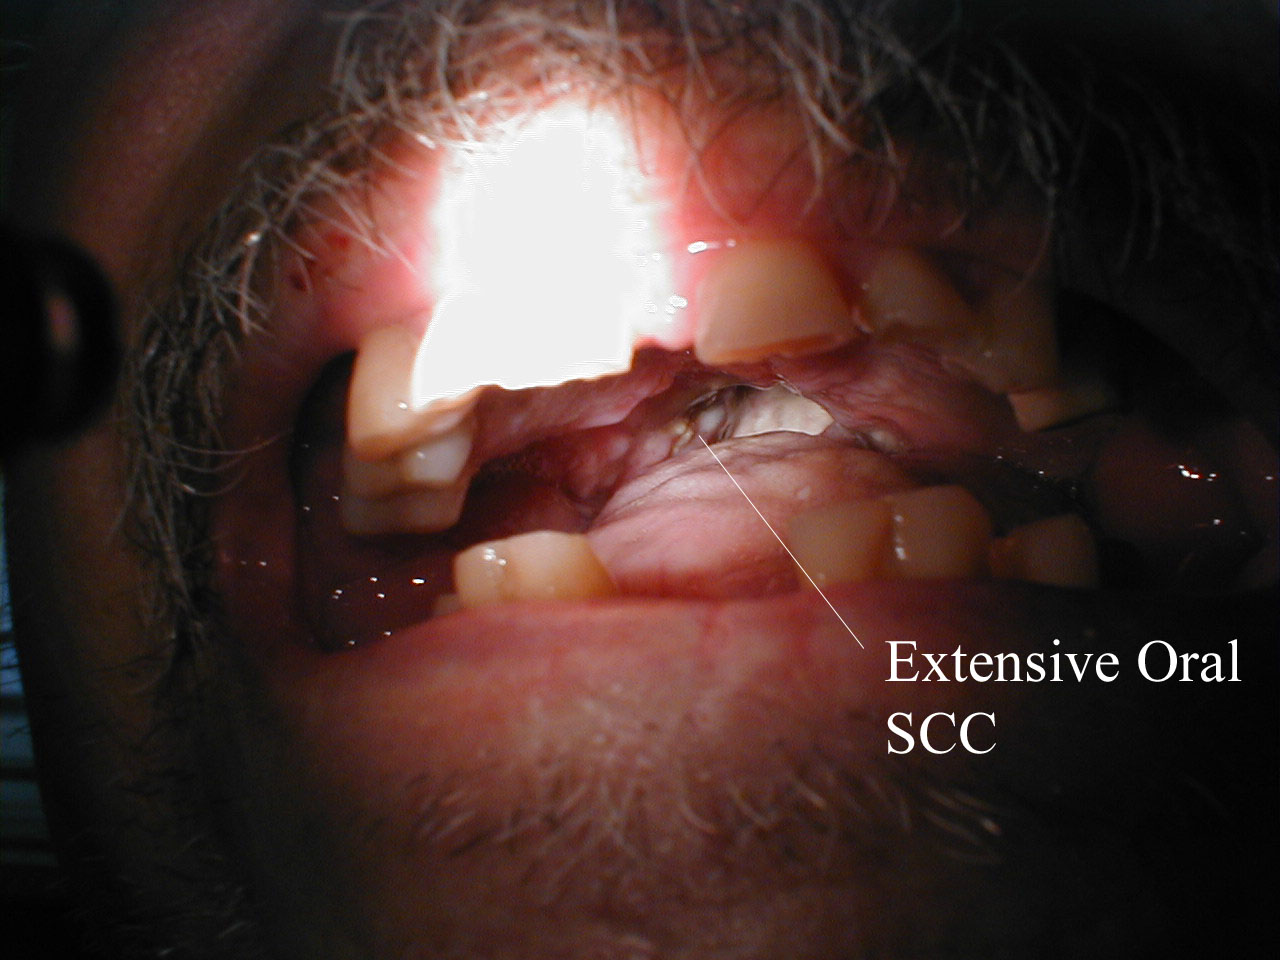 Squamous cell cancer of the mouth: Irregular, necrotic appearing tissue on the inside of the mouth due to extensive squamous cell cancer, resulting in a limited ability to open the mouth (aka trismus).